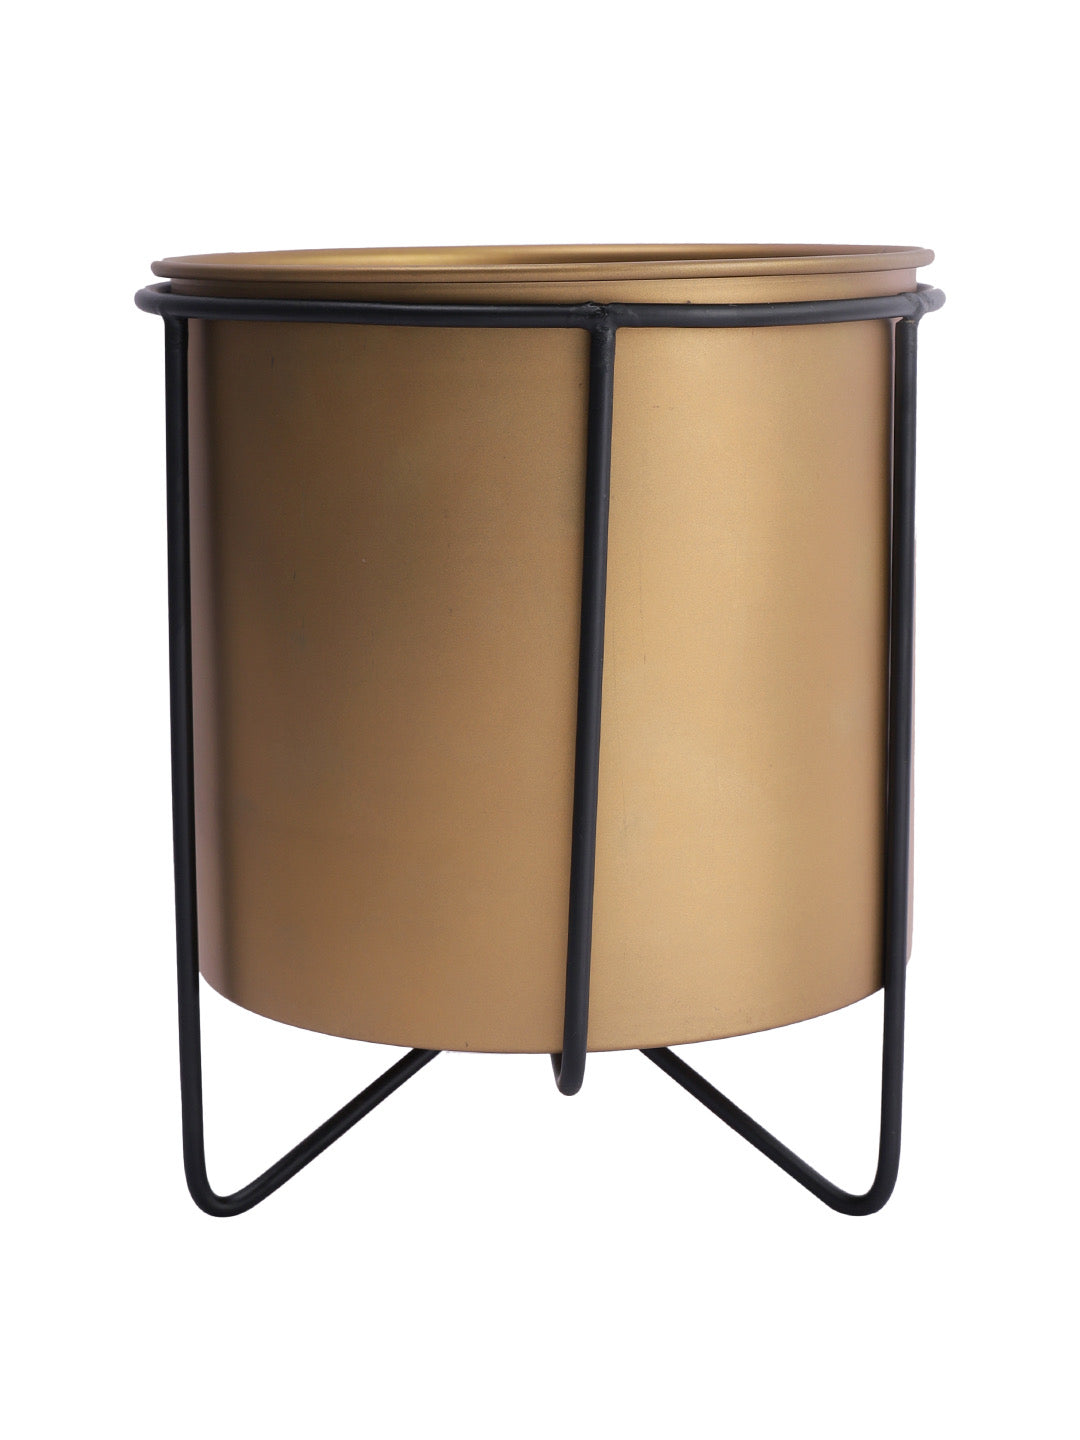 Golden Coated Planter with Stand - Default Title (CHM2125)